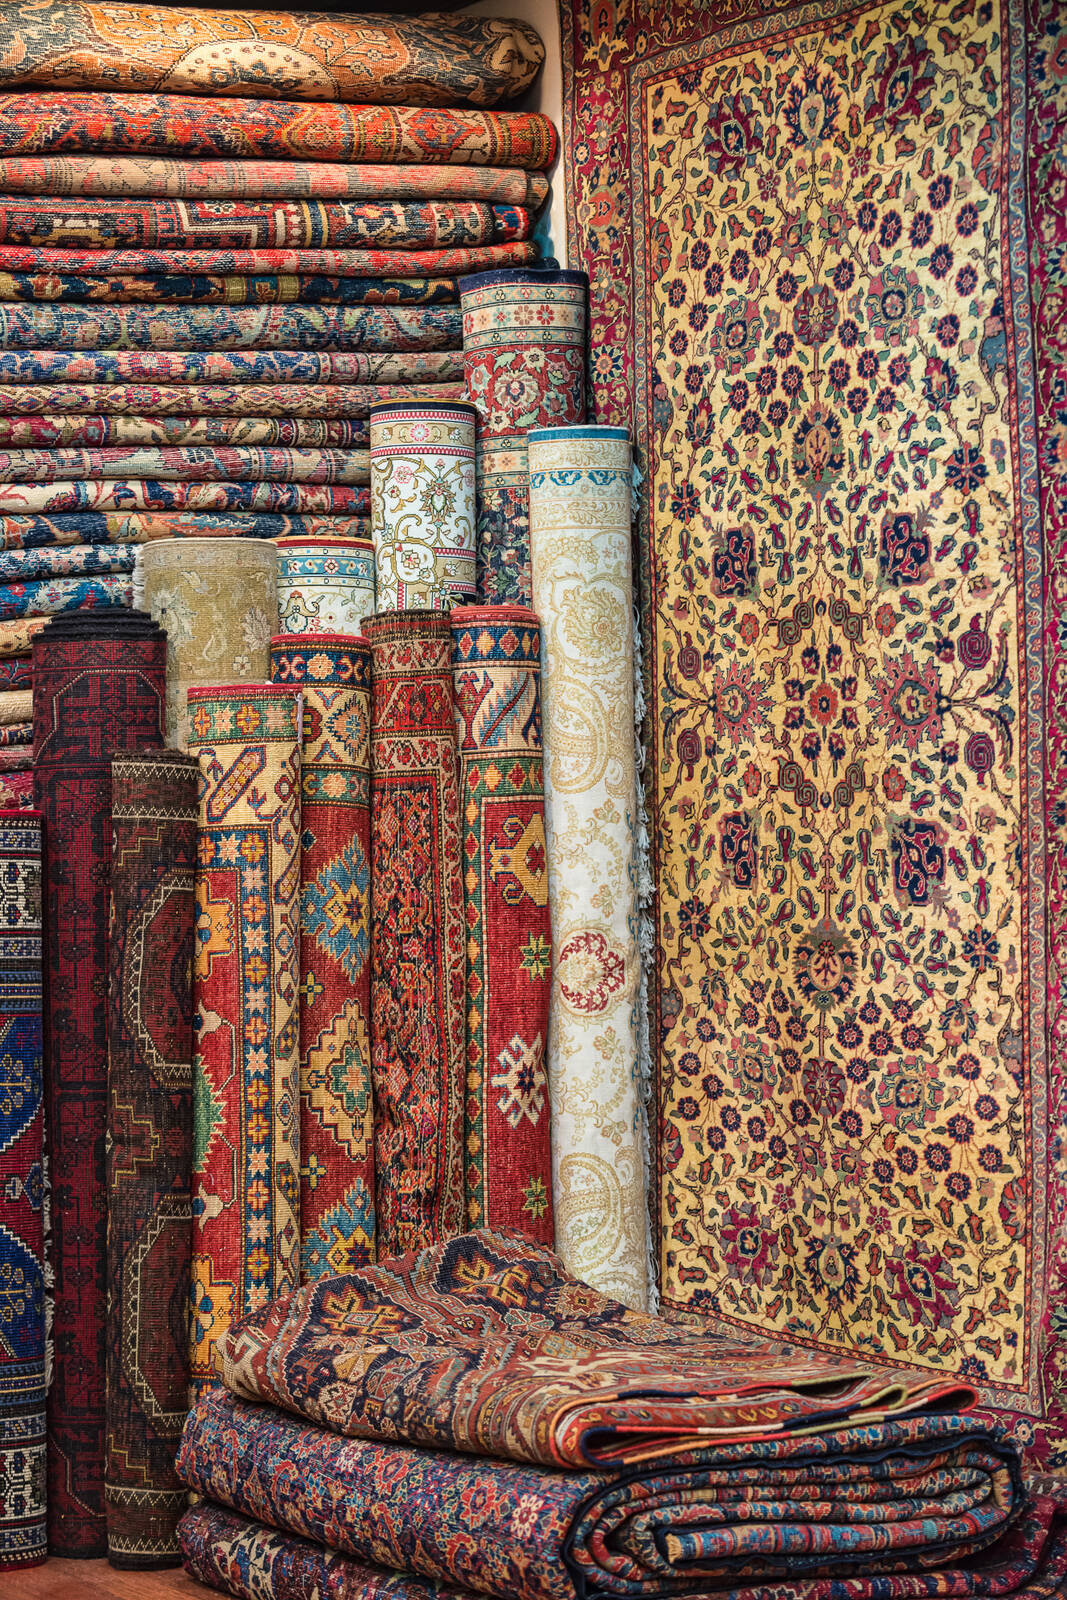 Image of Kapali Carshi (Grand Bazaar) by Sue Wolfe